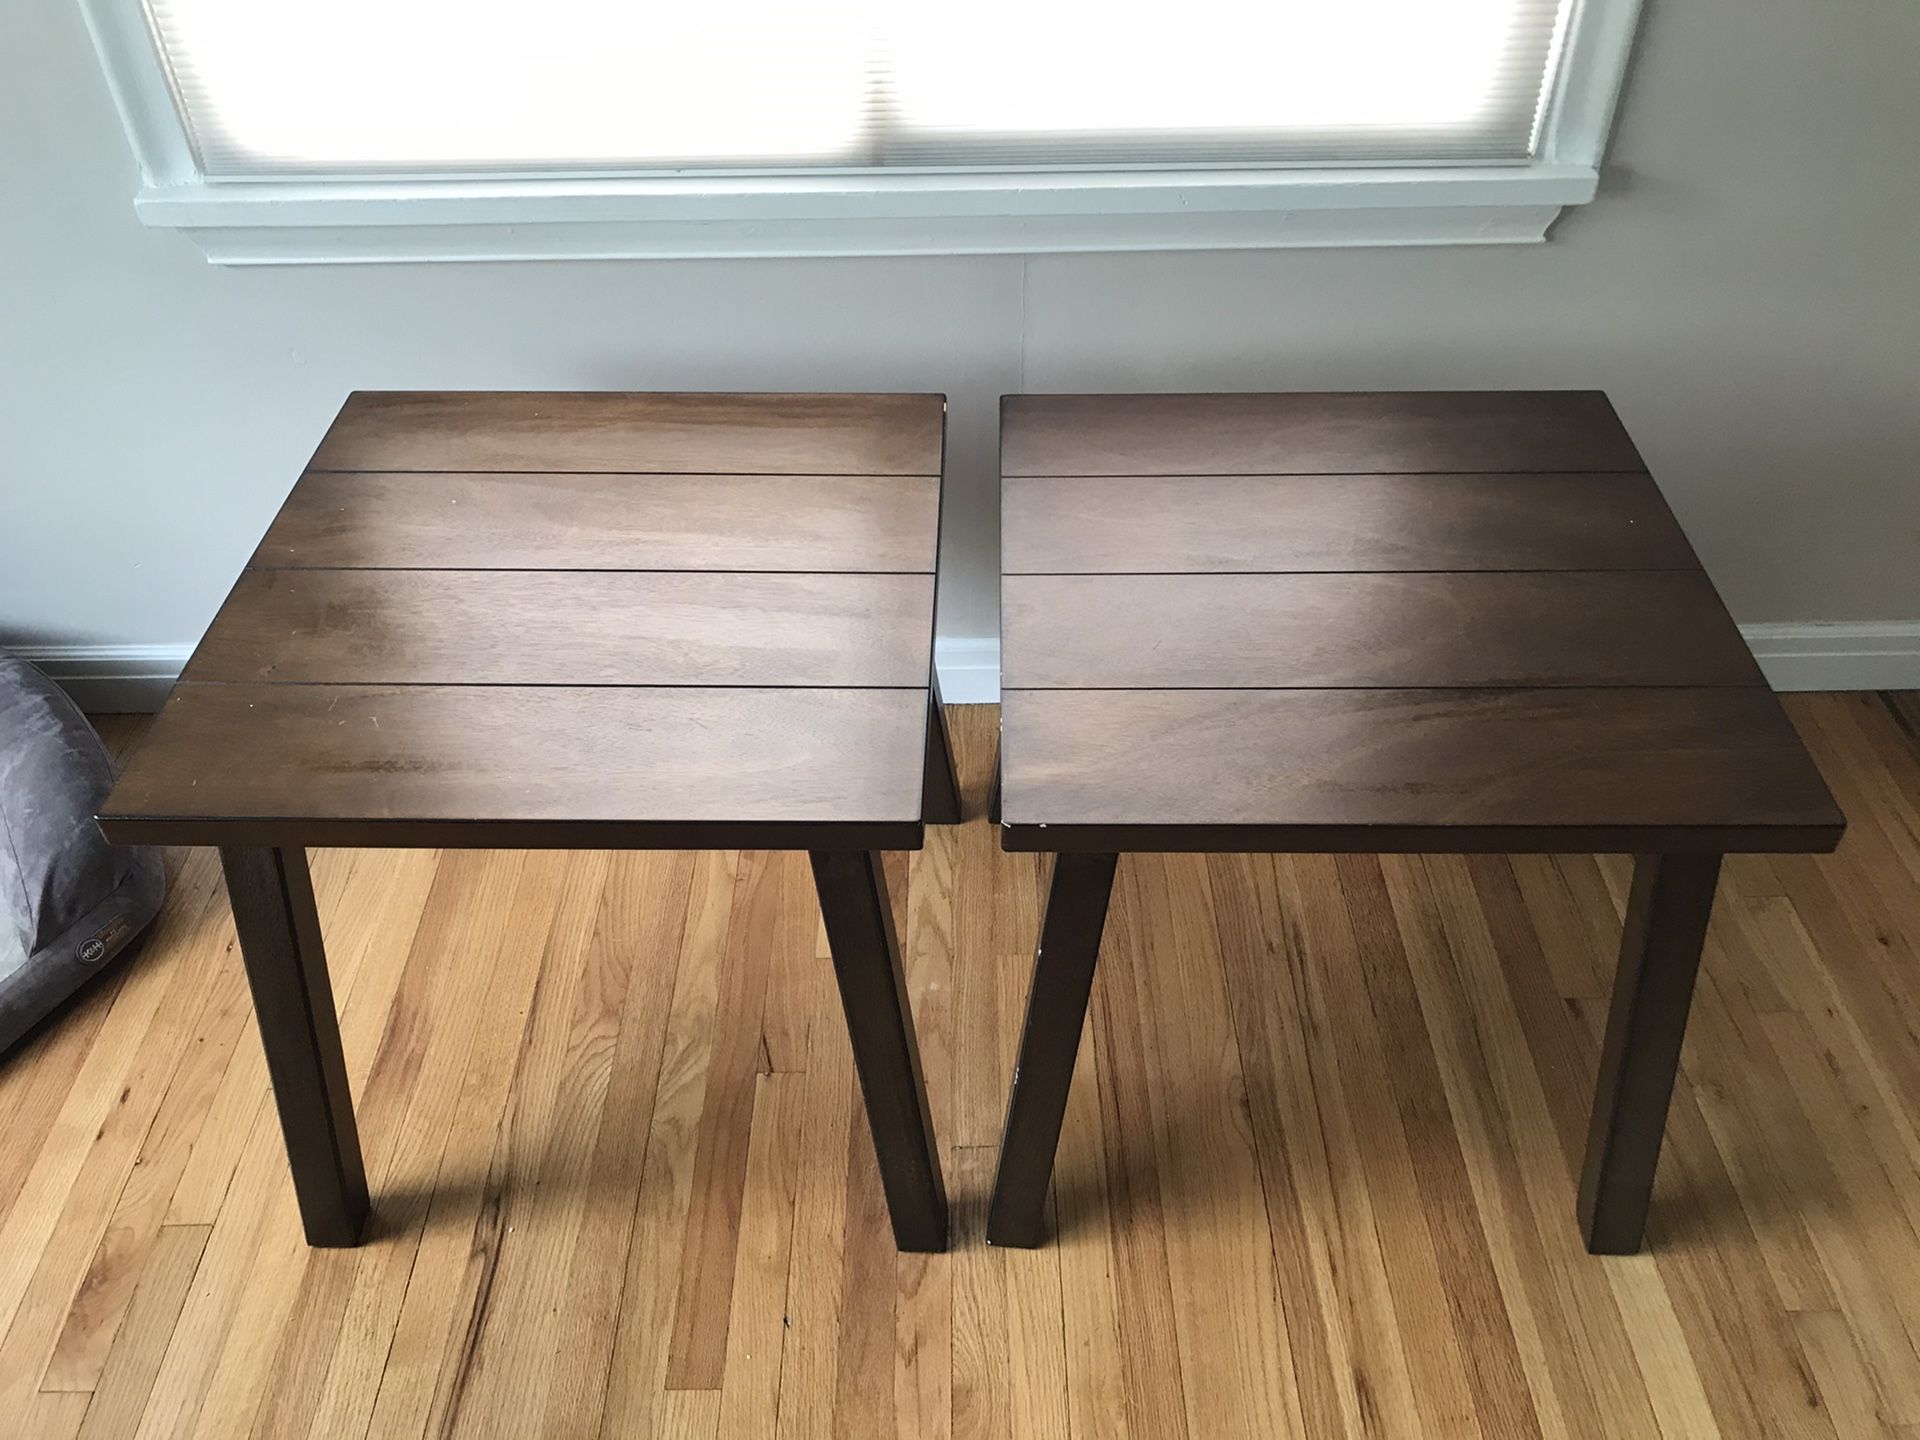 End Tables (Matching Set)